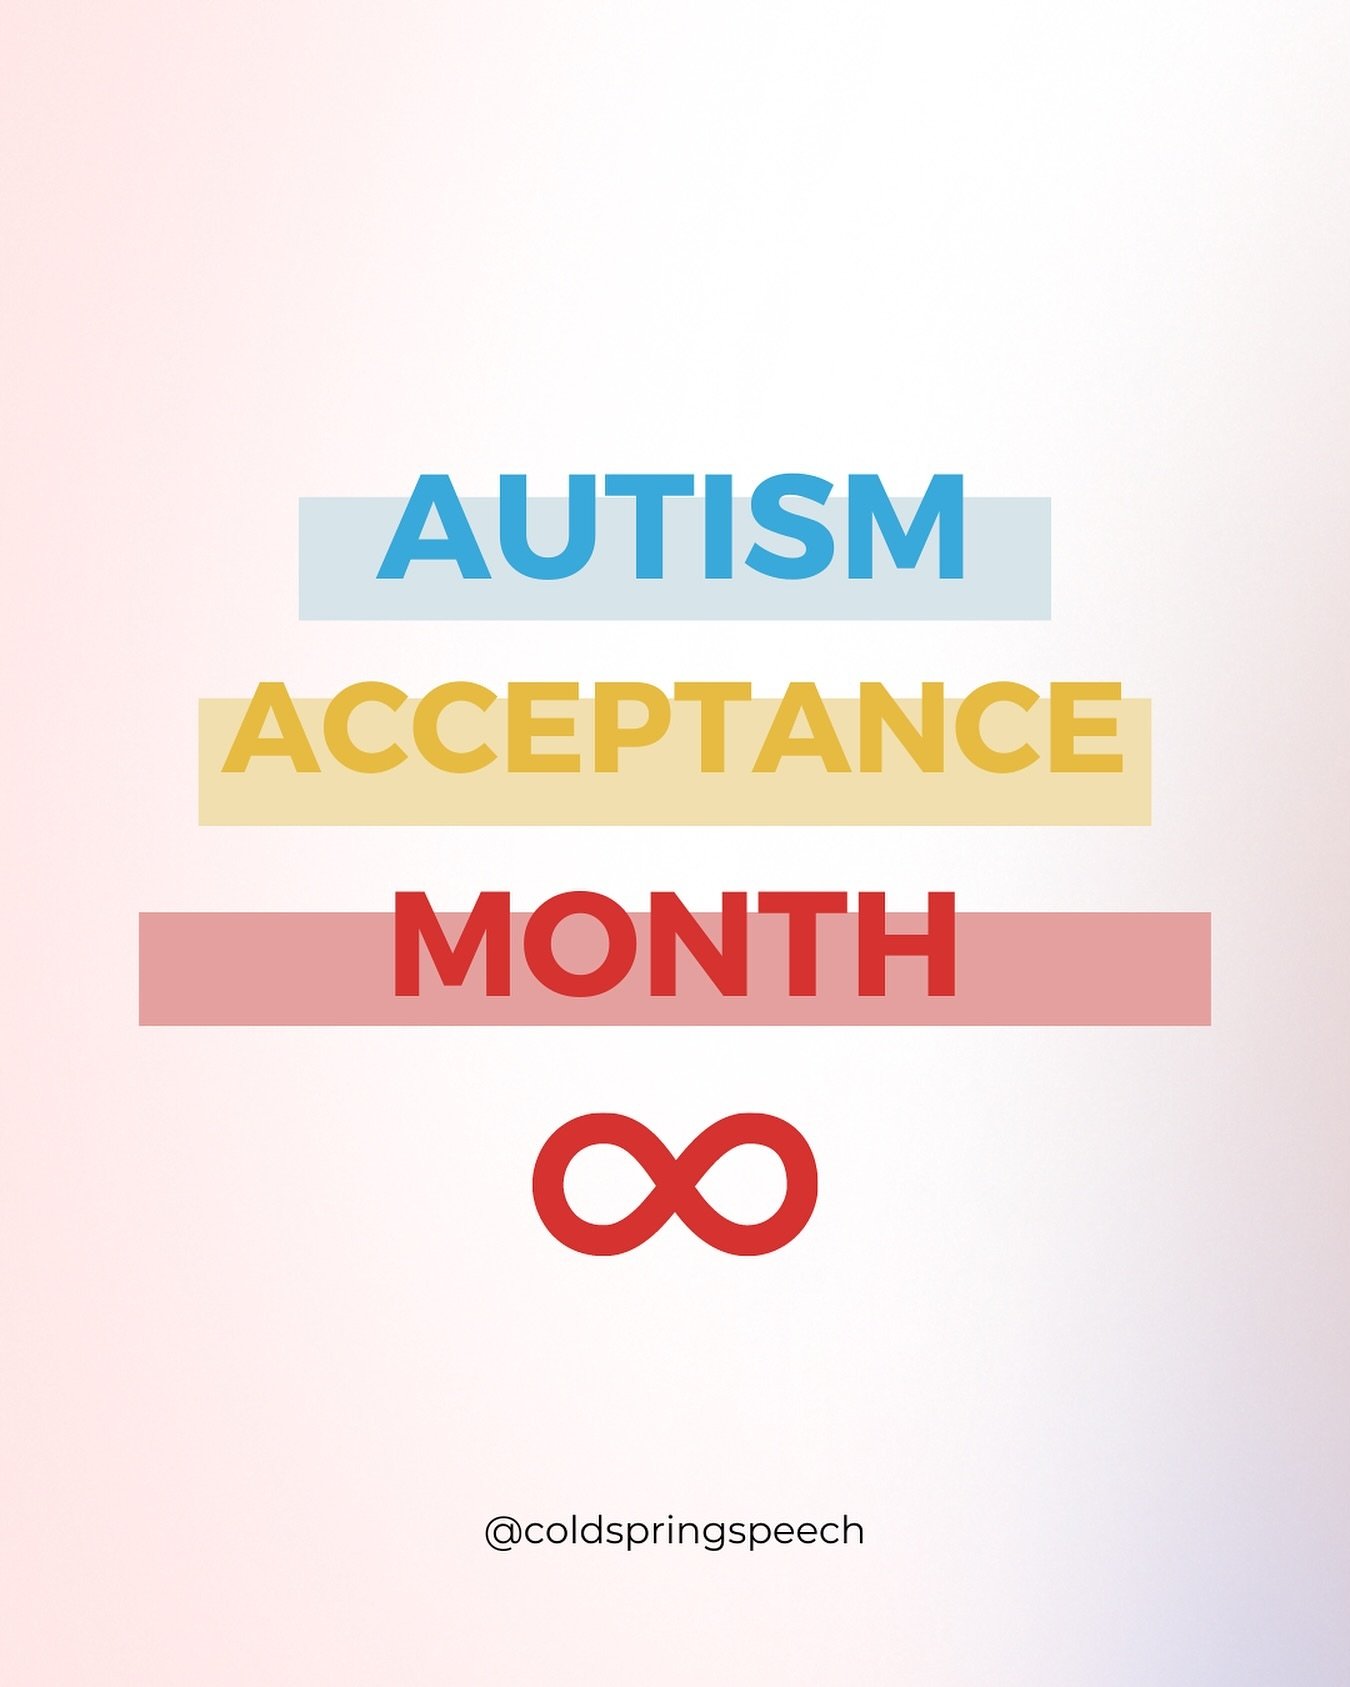 Celebrate Autism Acceptance Month with us! 

This month, we&rsquo;re focusing on creating a world where Autistic individuals feel valued and understood.

Previously known as Autism Awareness Month, this shift in name represents not just the need to b